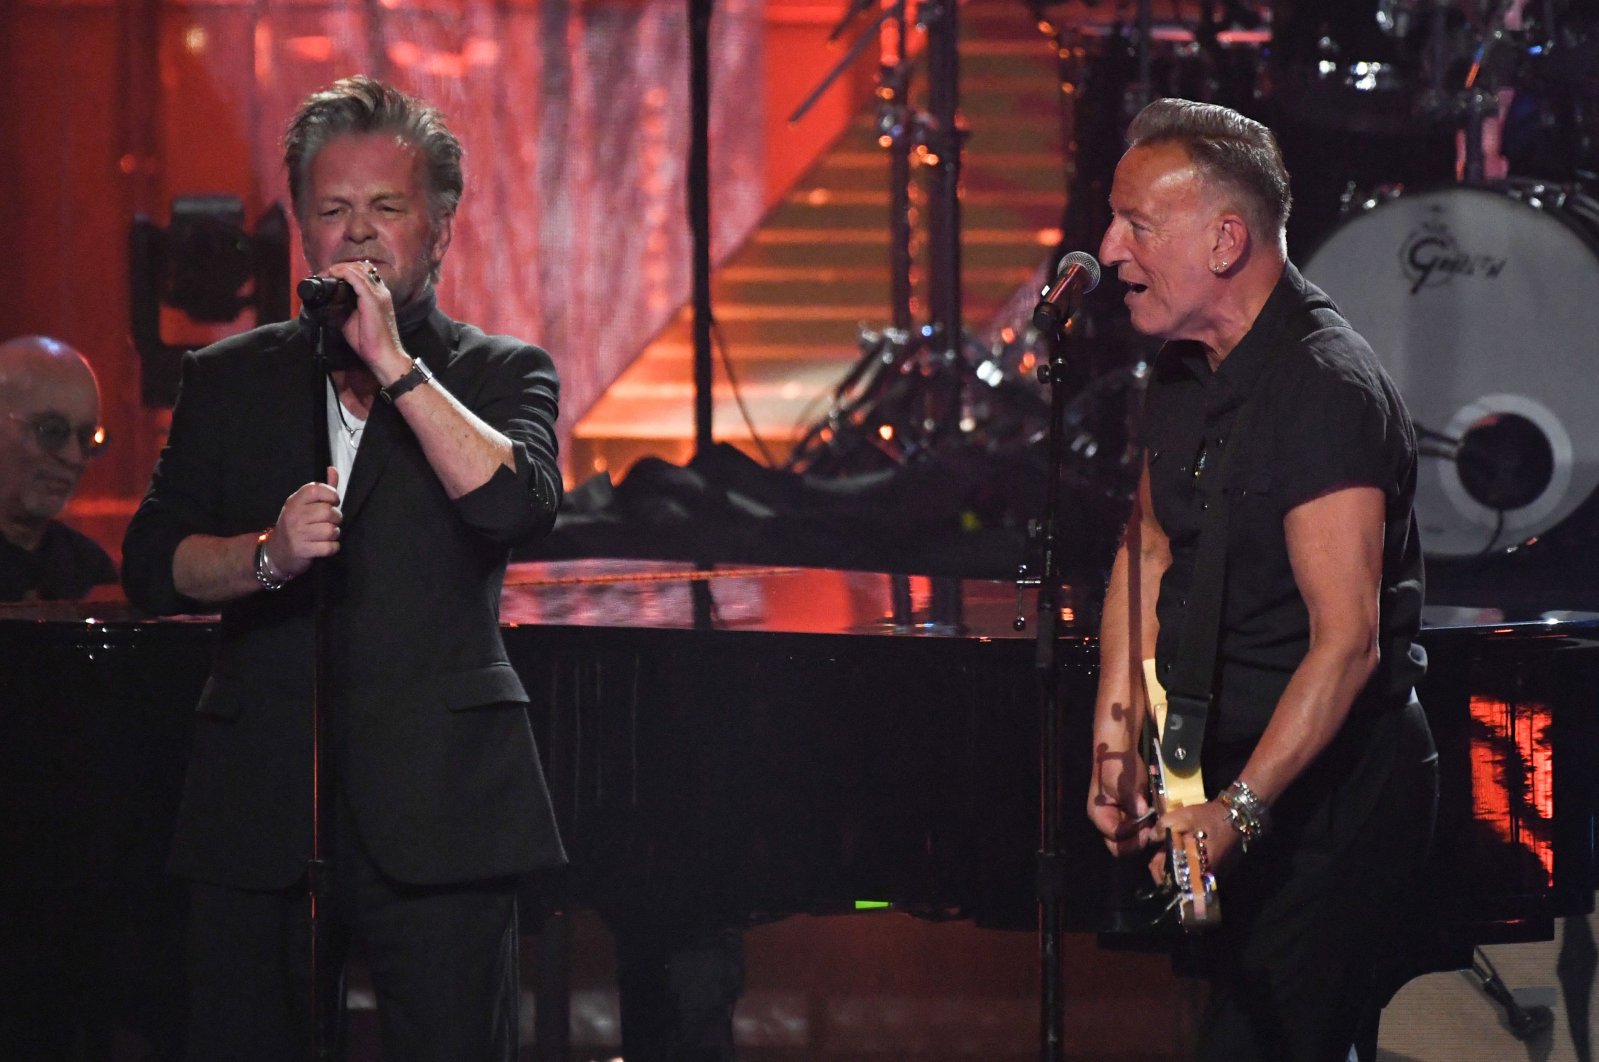 Musicians John Mellencamp (L) and Bruce Springsteen (R) perform during the 37th Annual Rock and Roll Hall of Fame induction ceremony at the Microsoft Theater, Los Angeles, California, U.S., Nov. 5, 2022. (AFP Photo)